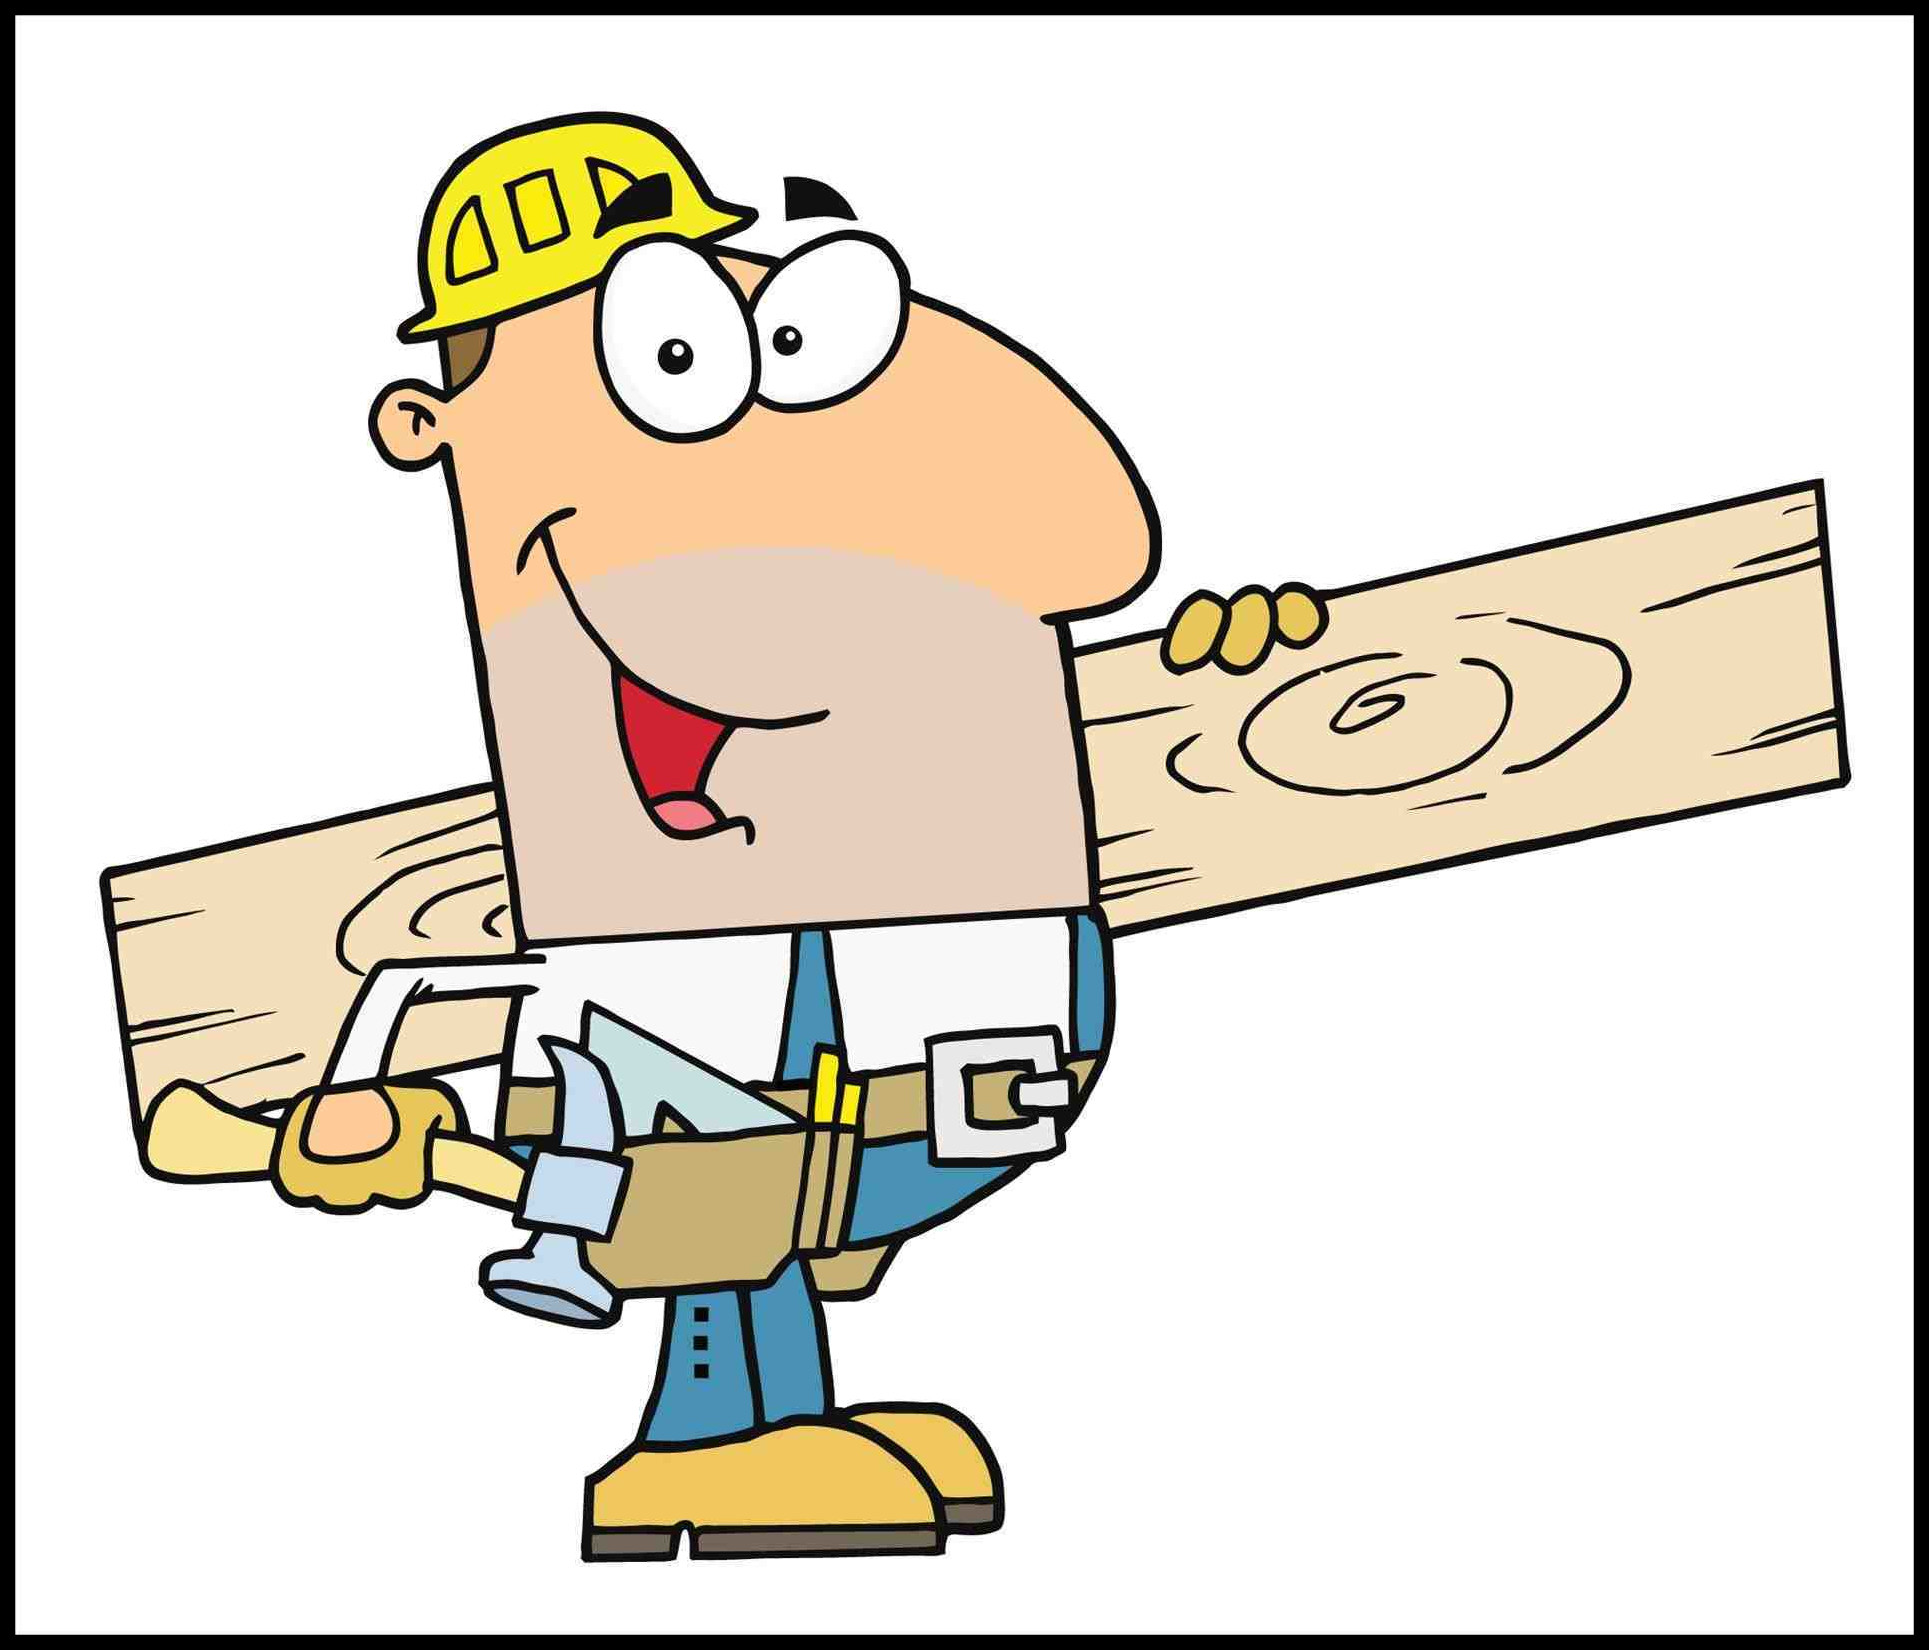 carpentry clipart woodshop tool